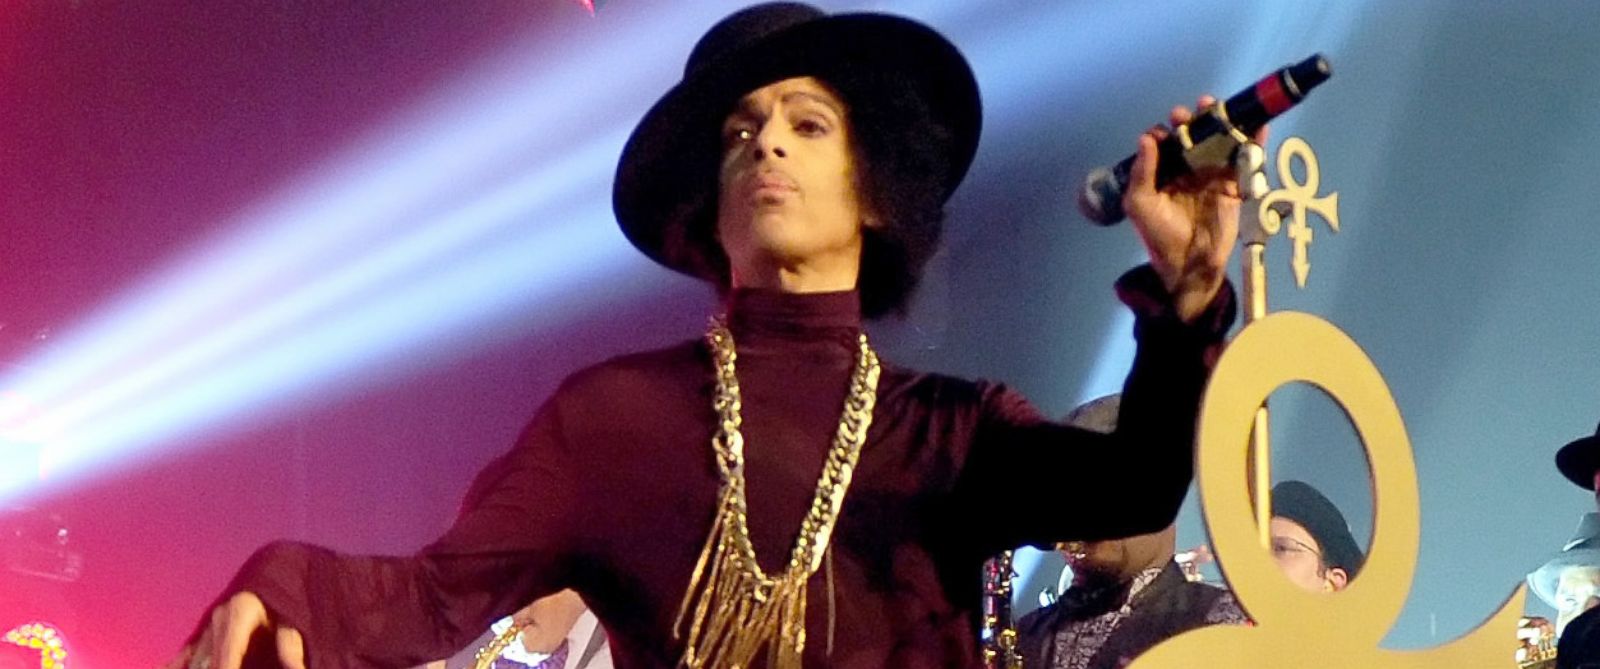 PHOTO: Prince performs onstage at The Hollywood Palladium, March 8, 2014, in Los Angeles.